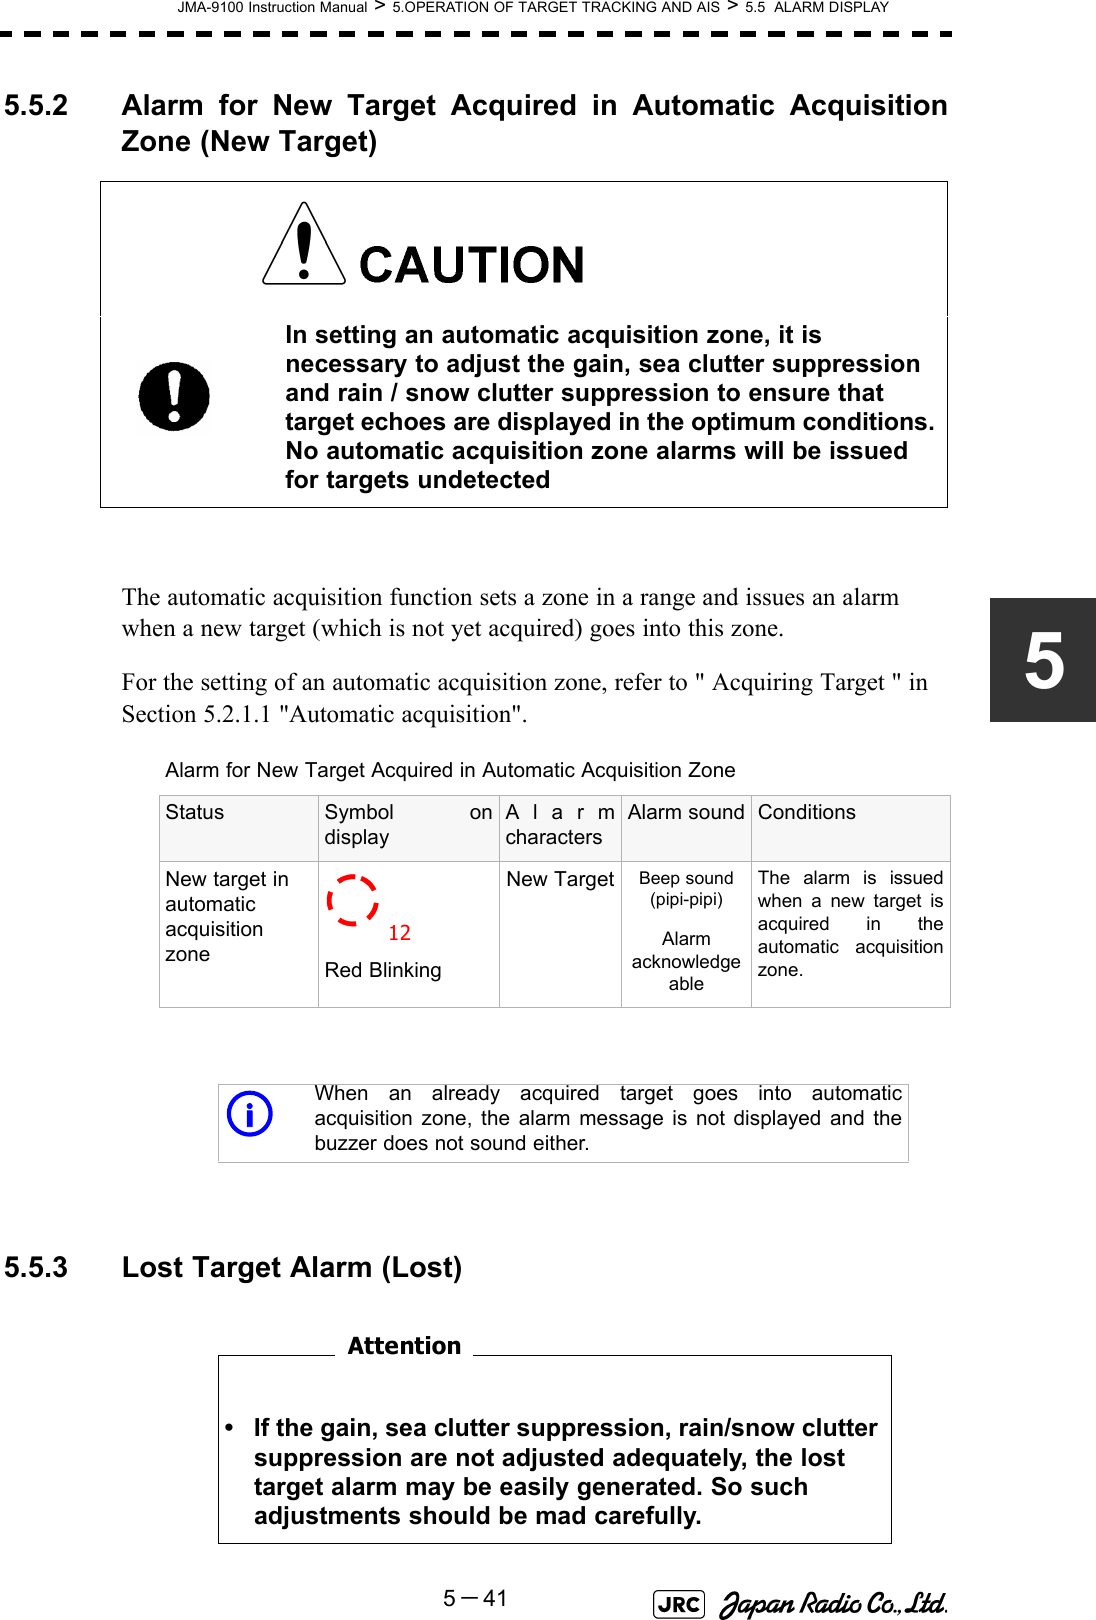 JMA-9100 Instruction Manual &gt; 5.OPERATION OF TARGET TRACKING AND AIS &gt; 5.5  ALARM DISPLAY5－4155.5.2 Alarm for New Target Acquired in Automatic AcquisitionZone (New Target)The automatic acquisition function sets a zone in a range and issues an alarm when a new target (which is not yet acquired) goes into this zone.For the setting of an automatic acquisition zone, refer to &quot; Acquiring Target &quot; in Section 5.2.1.1 &quot;Automatic acquisition&quot;. 5.5.3 Lost Target Alarm (Lost)　　　　　　　　In setting an automatic acquisition zone, it is necessary to adjust the gain, sea clutter suppression and rain / snow clutter suppression to ensure that target echoes are displayed in the optimum conditions. No automatic acquisition zone alarms will be issued for targets undetectedAlarm for New Target Acquired in Automatic Acquisition ZoneStatus Symbol ondisplayAlarmcharactersAlarm sound ConditionsNew target in automatic acquisition zone Red BlinkingNew Target Beep sound (pipi-pipi)Alarm acknowledgeableThe alarm is issuedwhen a new target isacquired in theautomatic acquisitionzone.iWhen an already acquired target goes into automaticacquisition zone, the alarm message is not displayed and thebuzzer does not sound either.• If the gain, sea clutter suppression, rain/snow clutter suppression are not adjusted adequately, the lost target alarm may be easily generated. So such adjustments should be mad carefully.12Attention